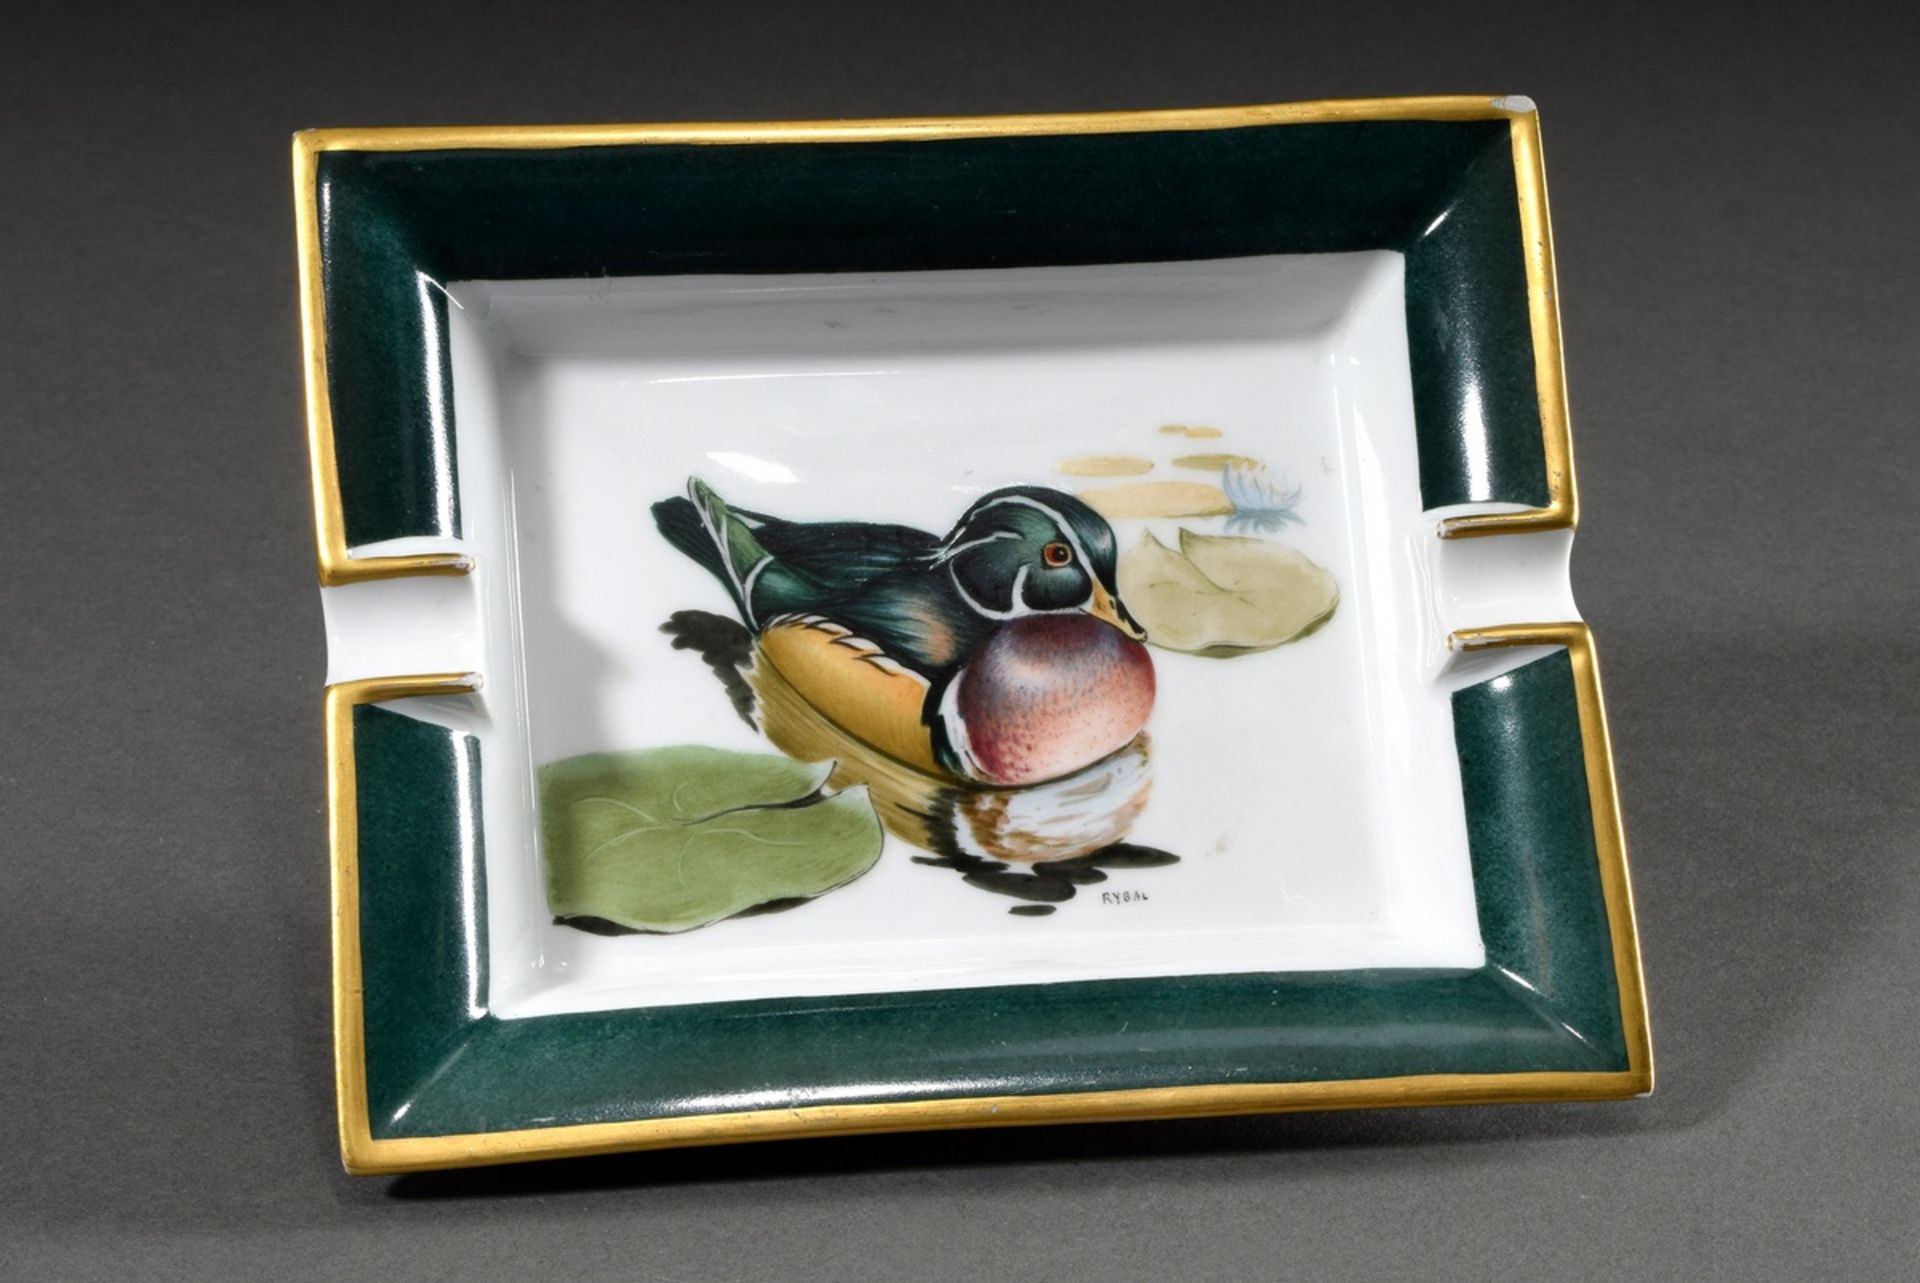 Hermès porcelain ashtray "Brautente", colourfully painted in green/gold, sign. Rybal, 19x18cm, rubb